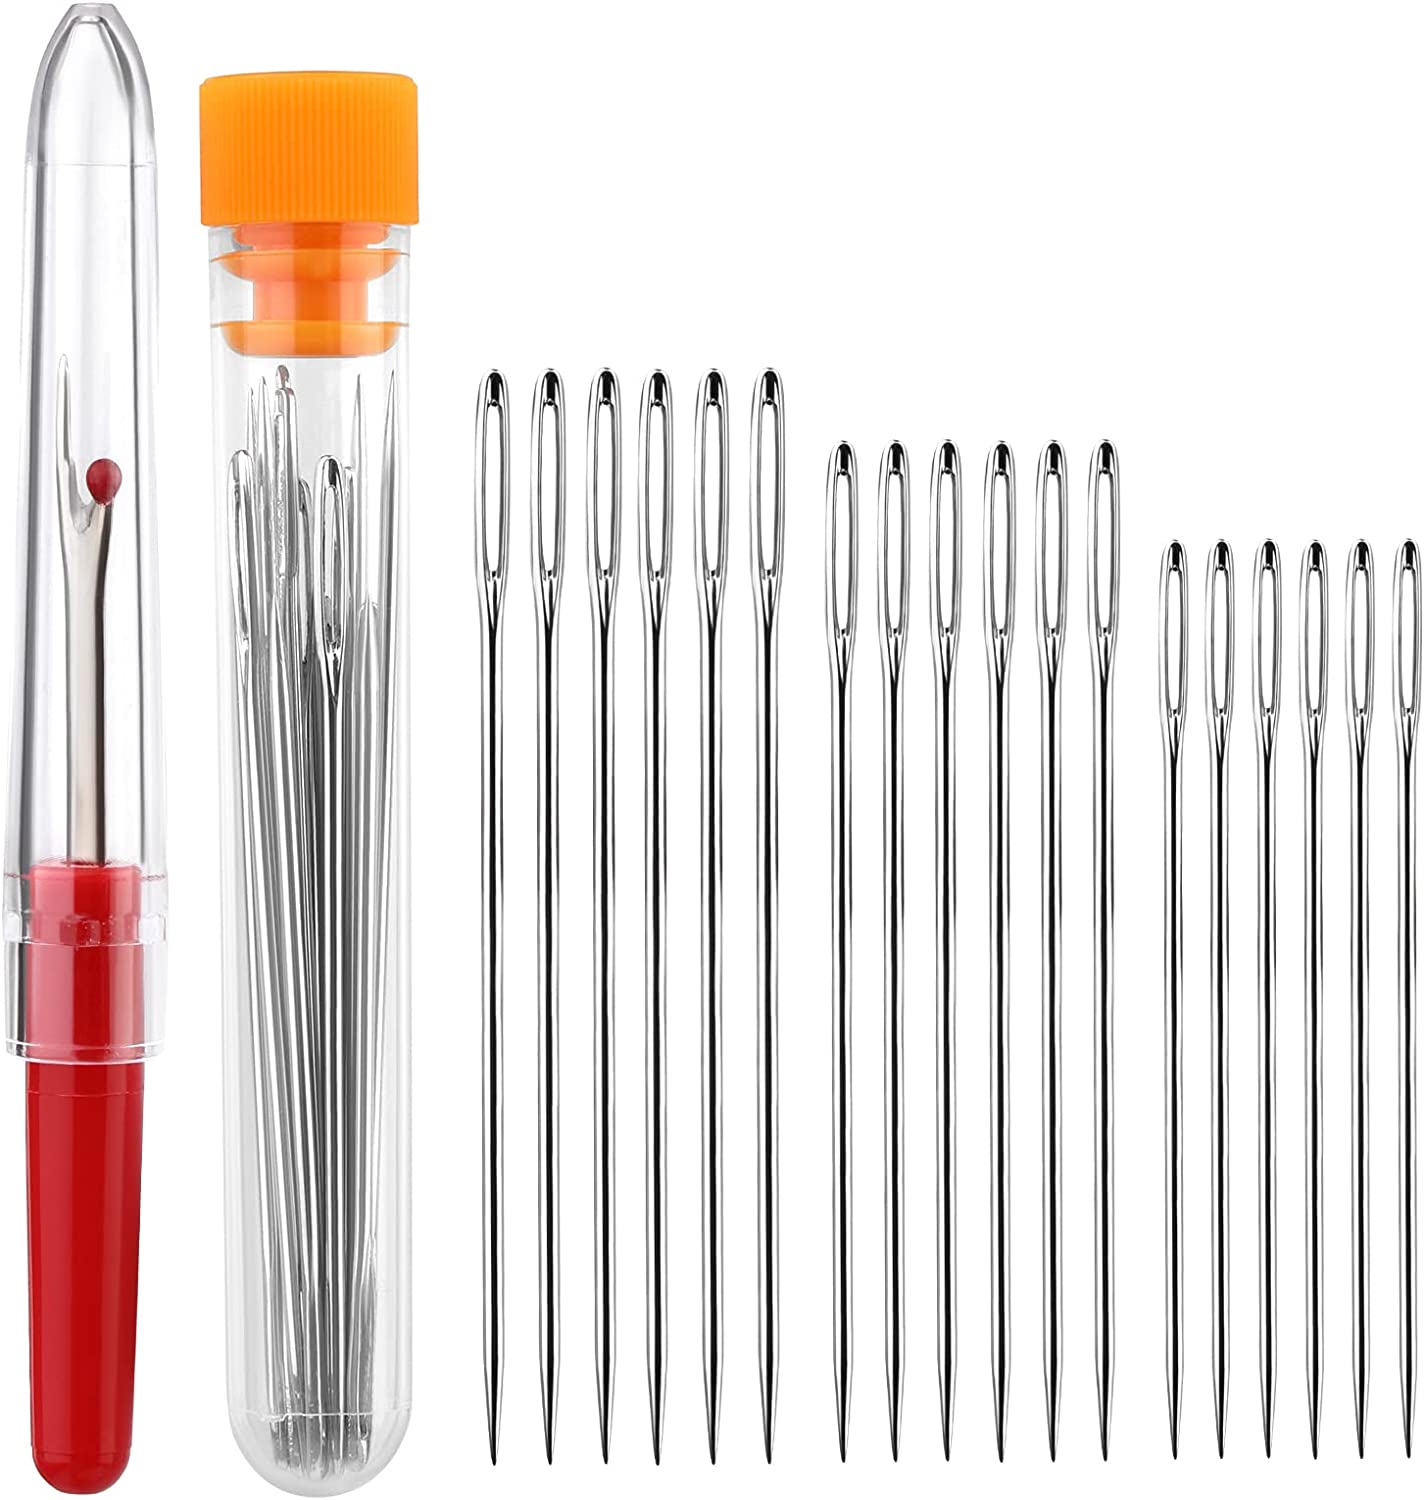 18pcs Large Eye Needle for Sewing, 3 Size Sewing Needles, Sewing Sharp Needles, Stainless Steel Yarn Knitting Big Eye Sewing Needles with Seam Ripper